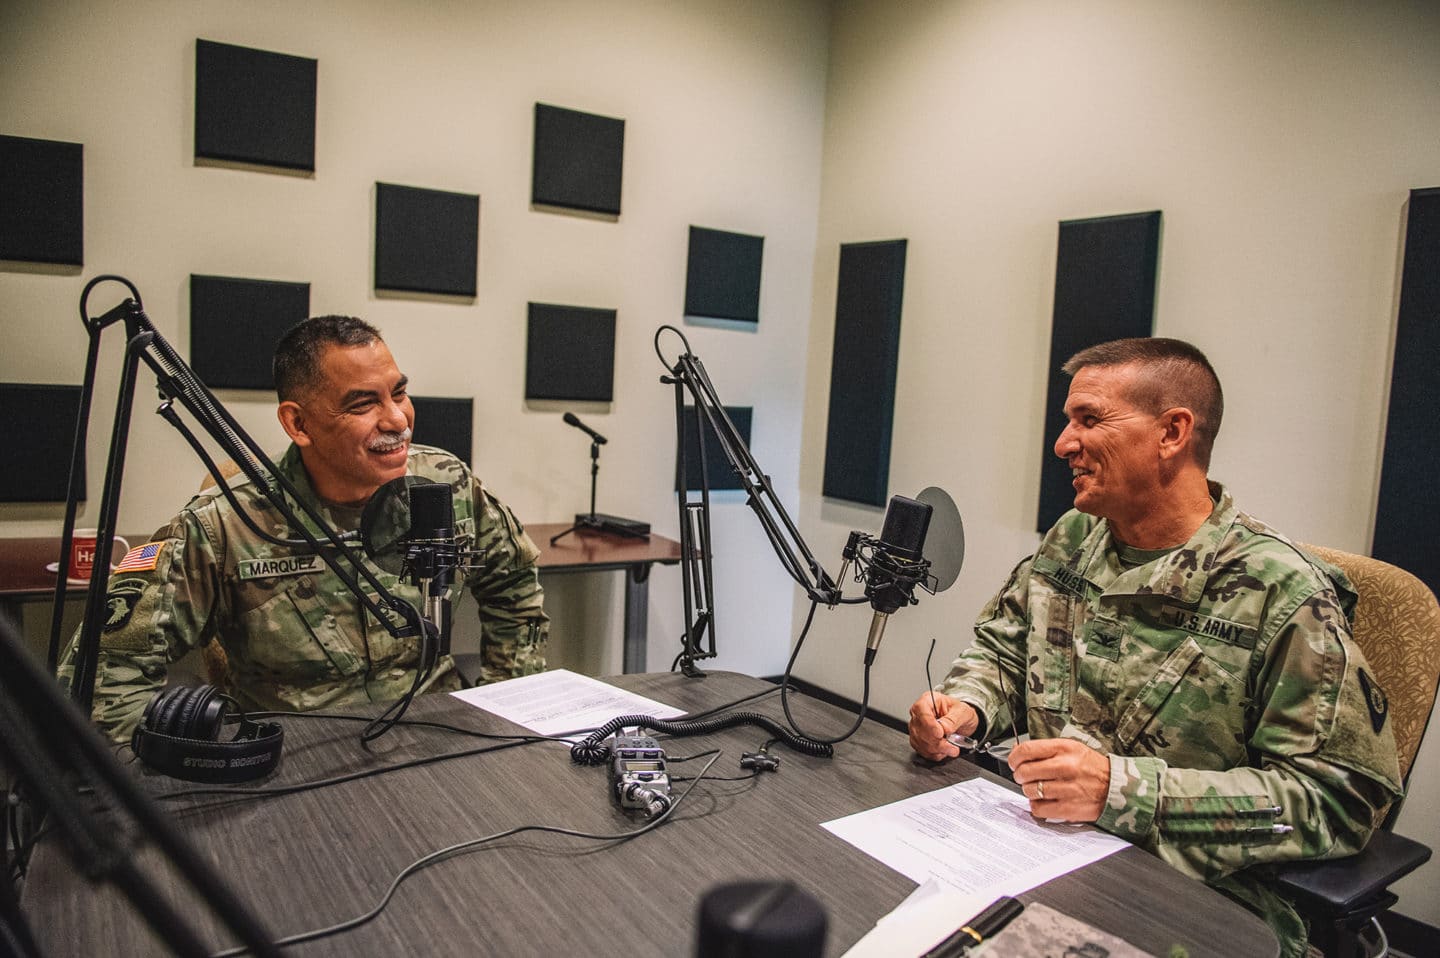 Love Podcasts? Here Are The 7 Best Military Podcasts Of 2019 - Sandboxx